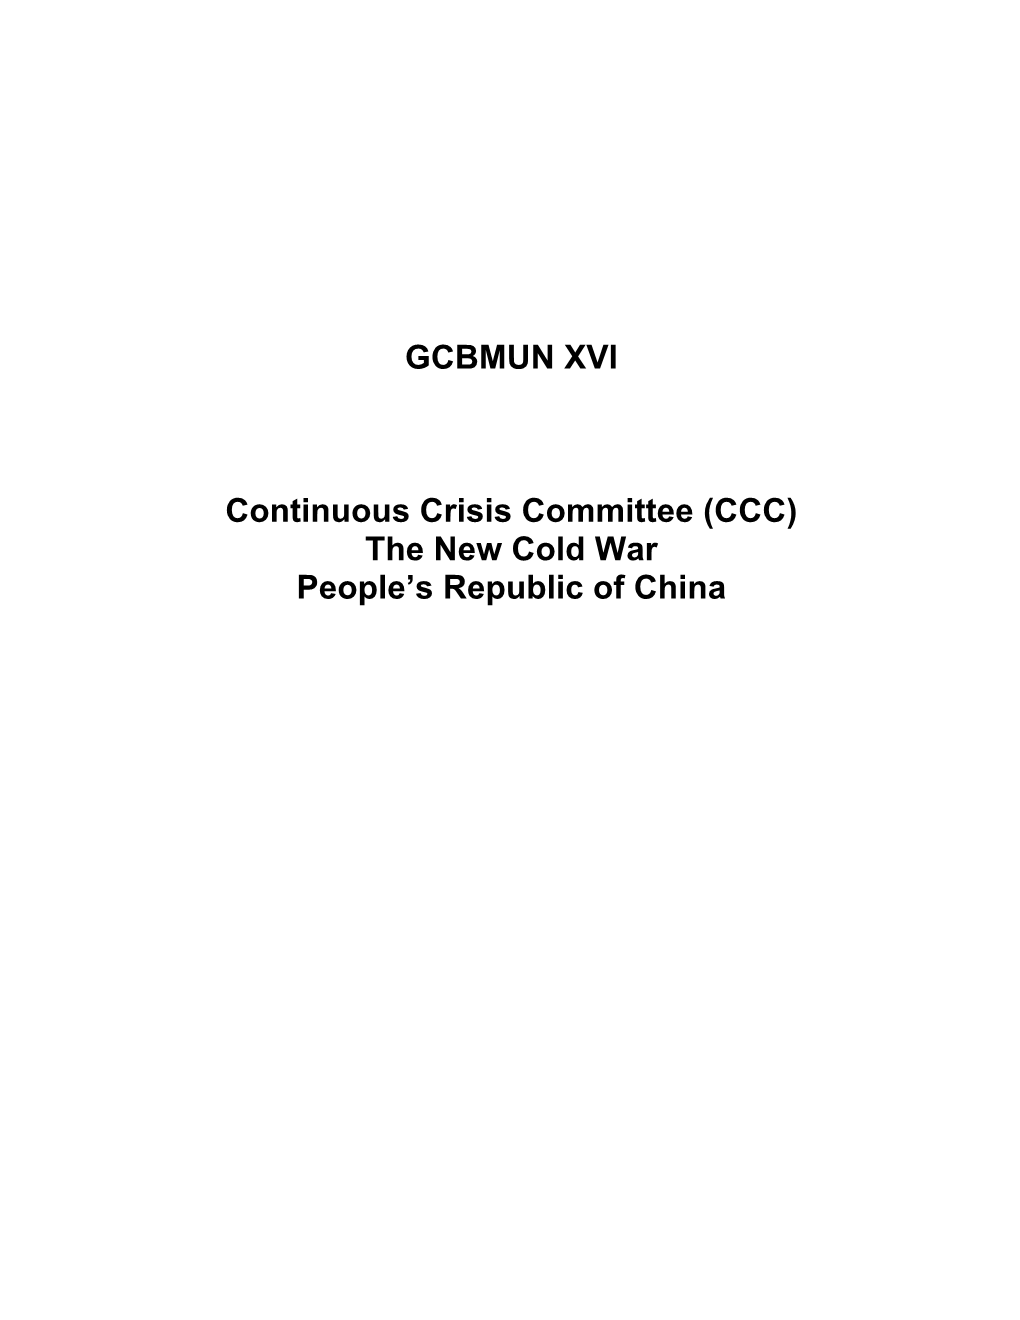 GCBMUN XVI Continuous Crisis Committee (CCC) the New Cold War People's Republic of China